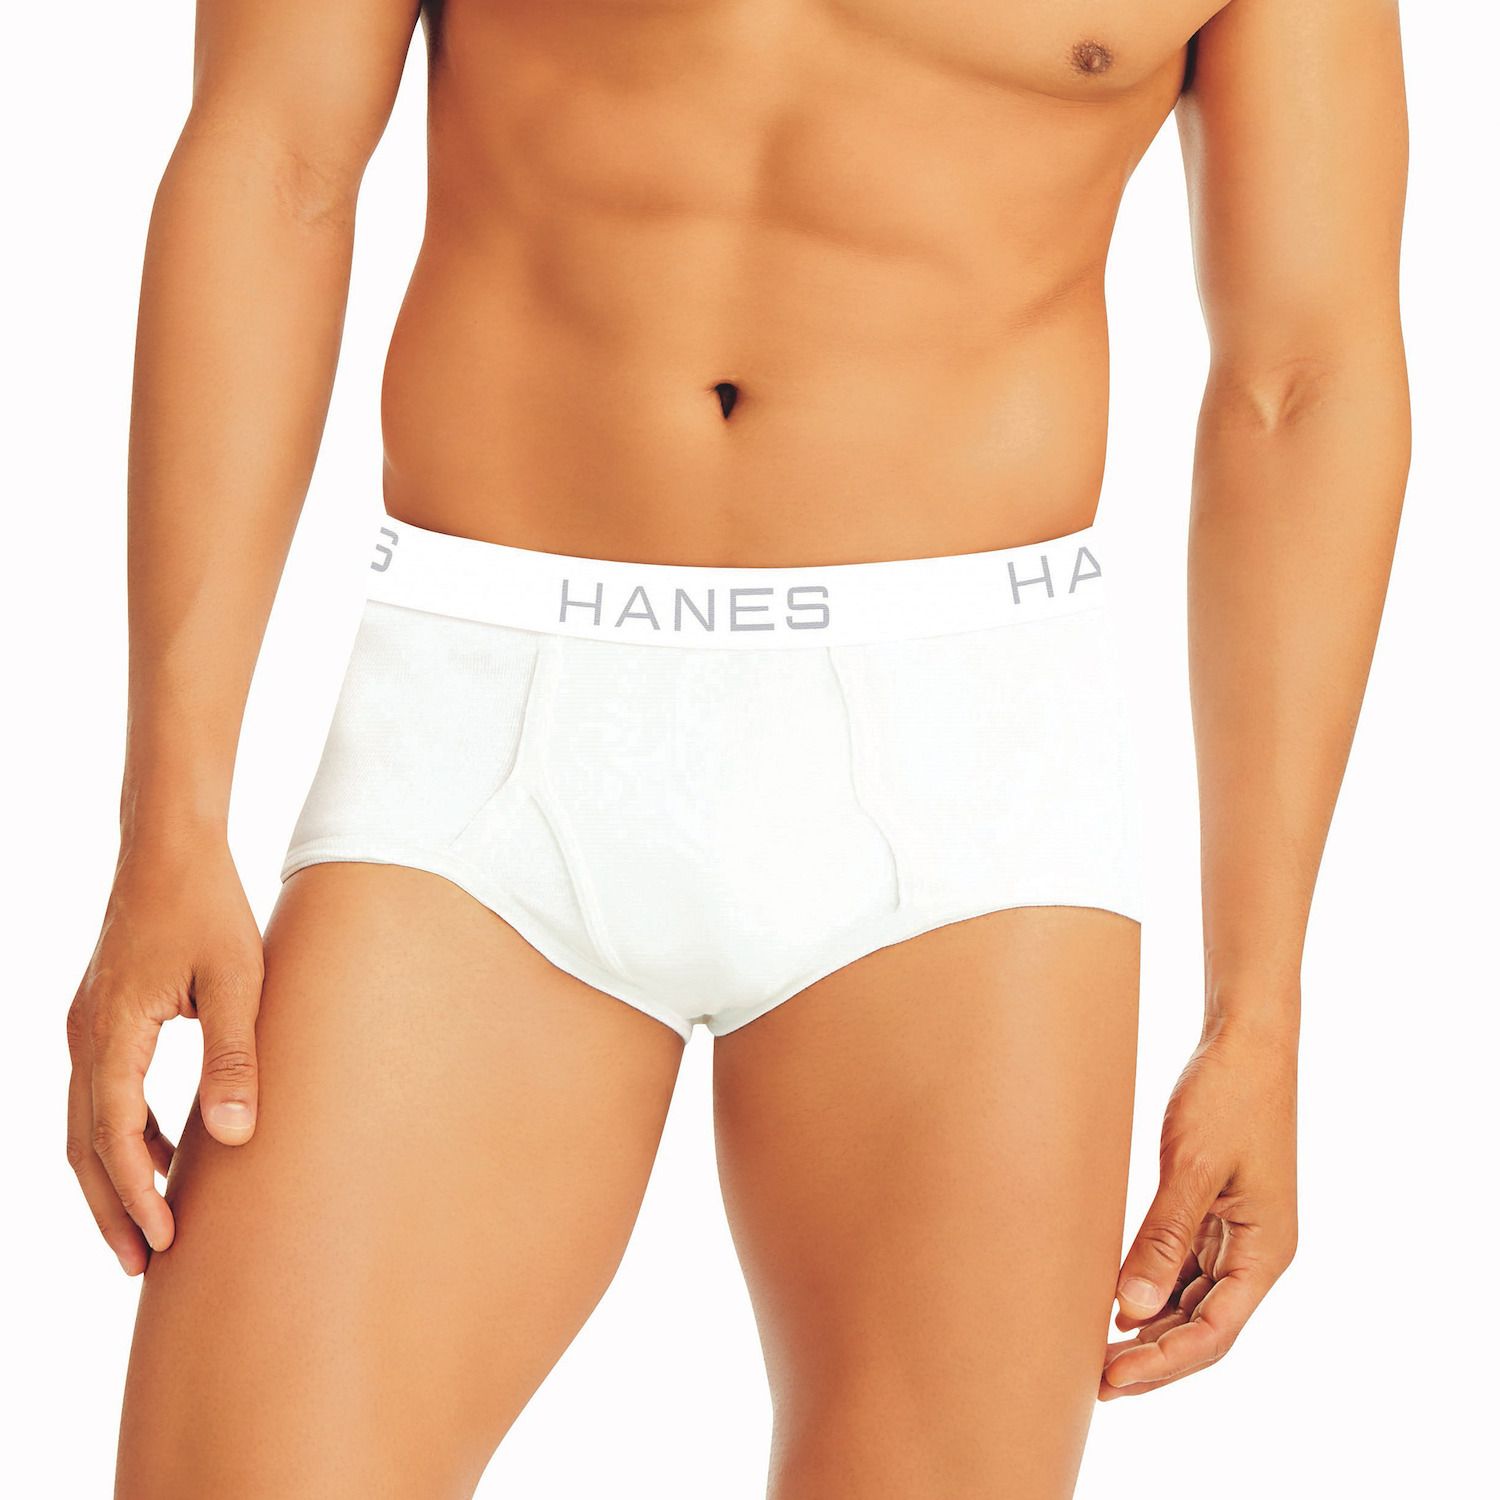 Image for Hanes Big & Tall Ultimate 6-pack Full-Cut Big Man Briefs 2XL at Kohl's.